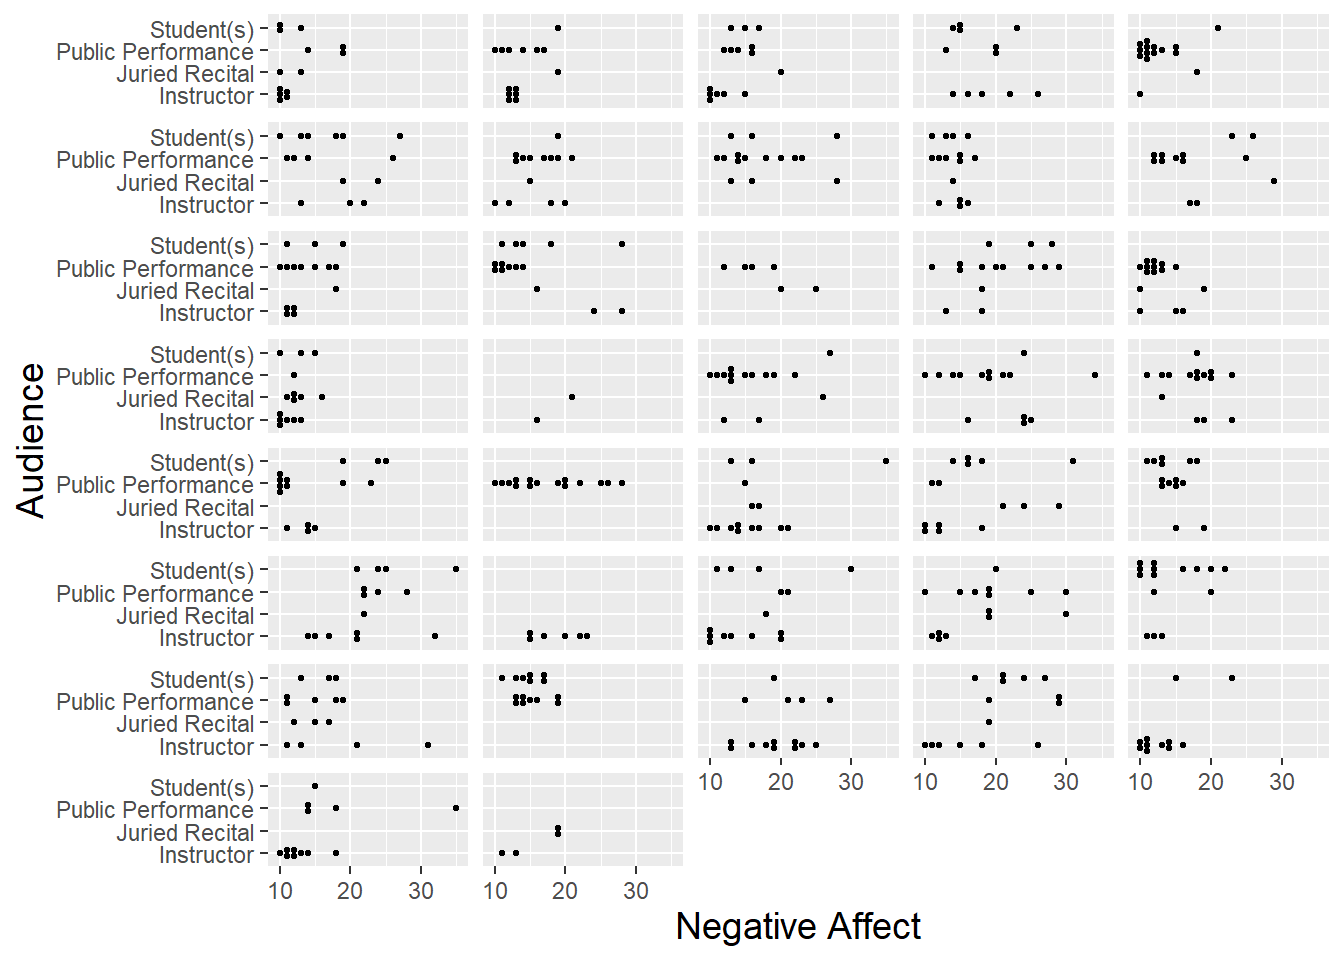 Lattice plot of audience type vs. negative affect, with separate dotplots by subject.